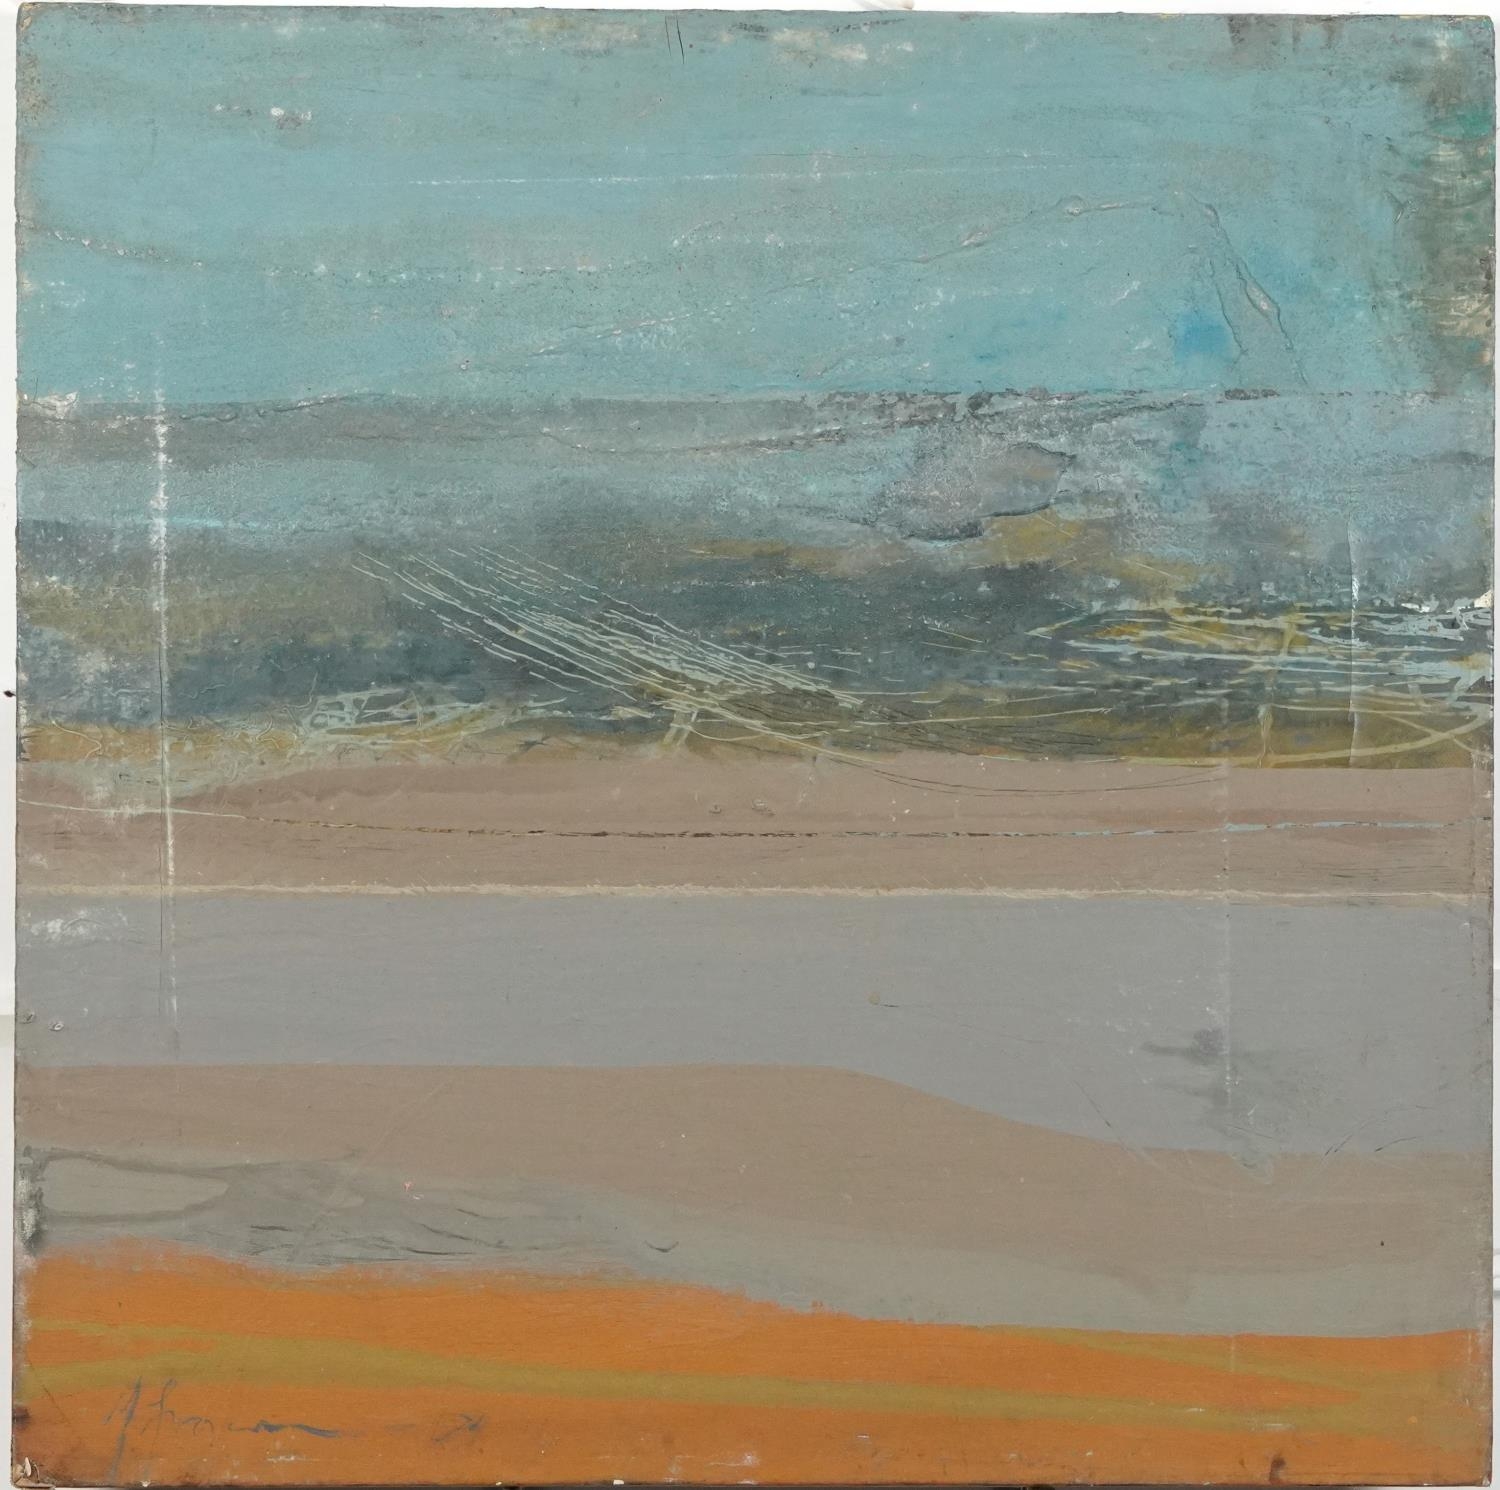 Seashore, abstract composition oil on canvas, inscribed verso, unframed, 61cm x 61cm - Image 2 of 5